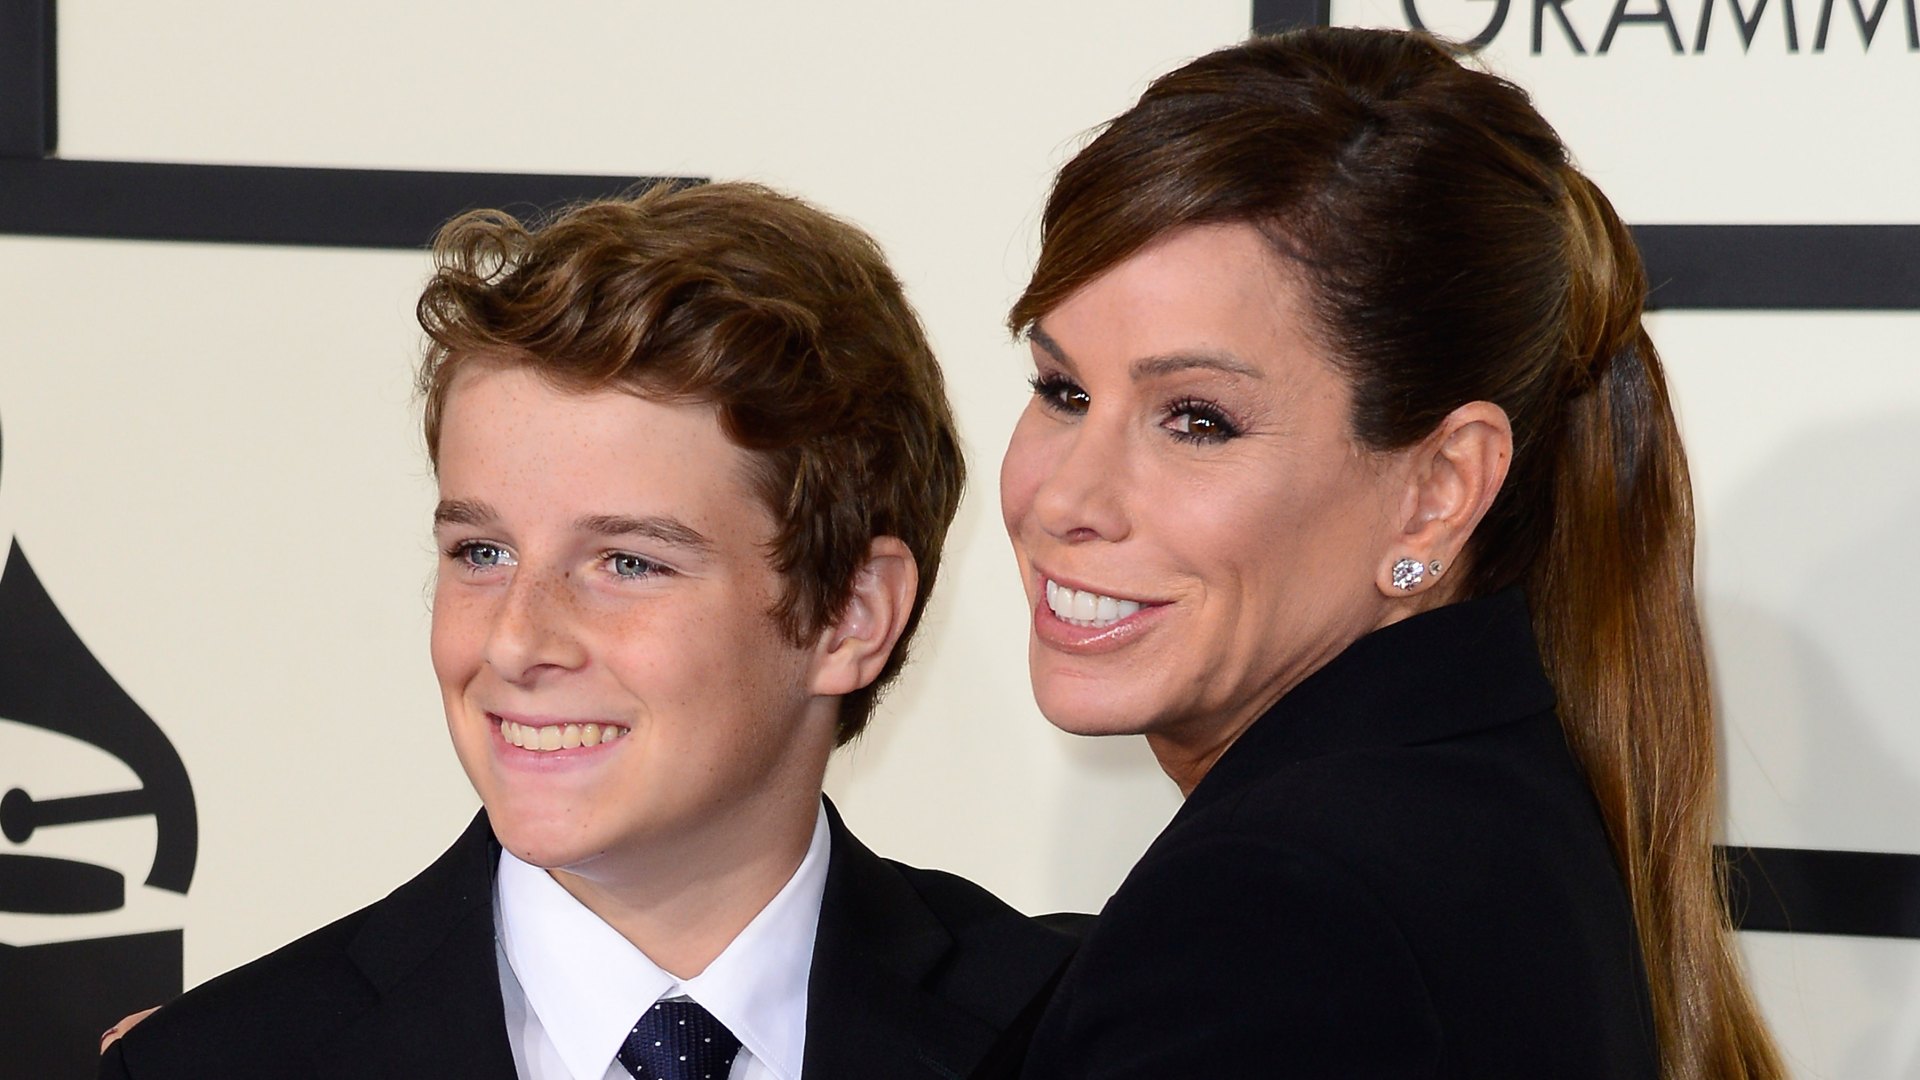 Melissa Rivers' Rare Family Photos With Her Only Son Cooper